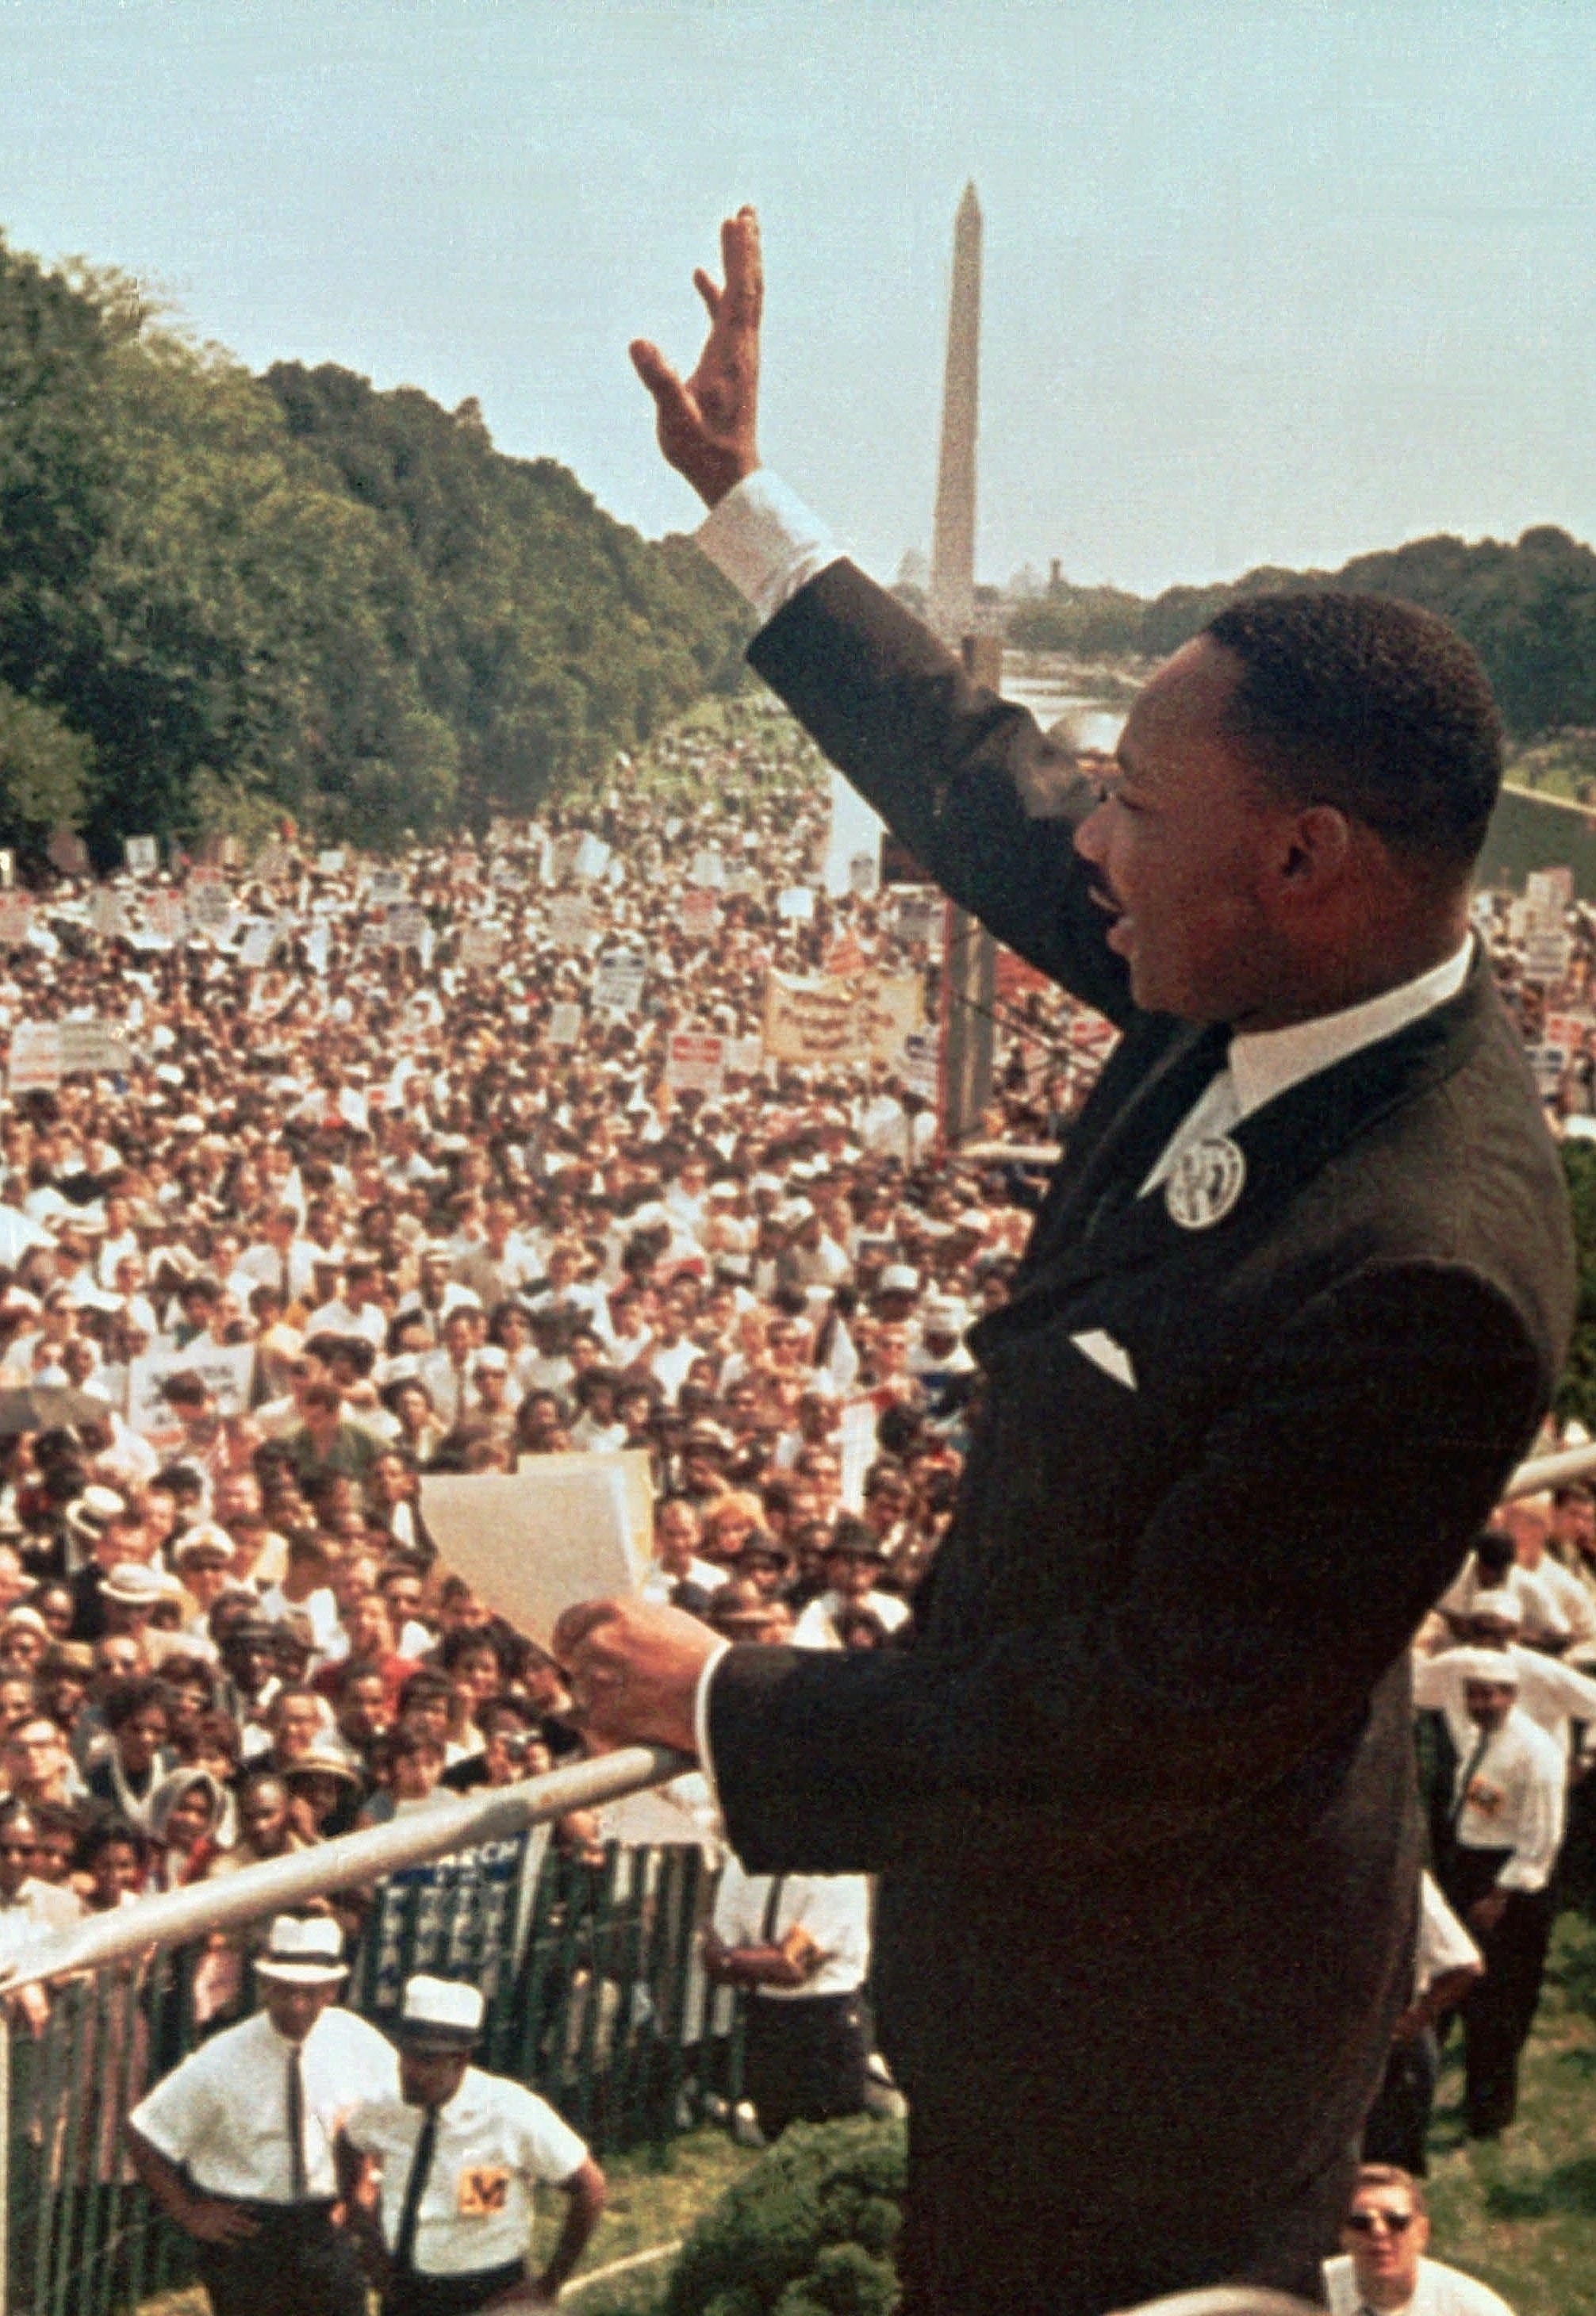 FILE - In this Aug. 28, 1963 file photo, the Rev. Dr. Martin Luther King, Jr. acknowledges the crowd at the Lincoln Memorial for his 